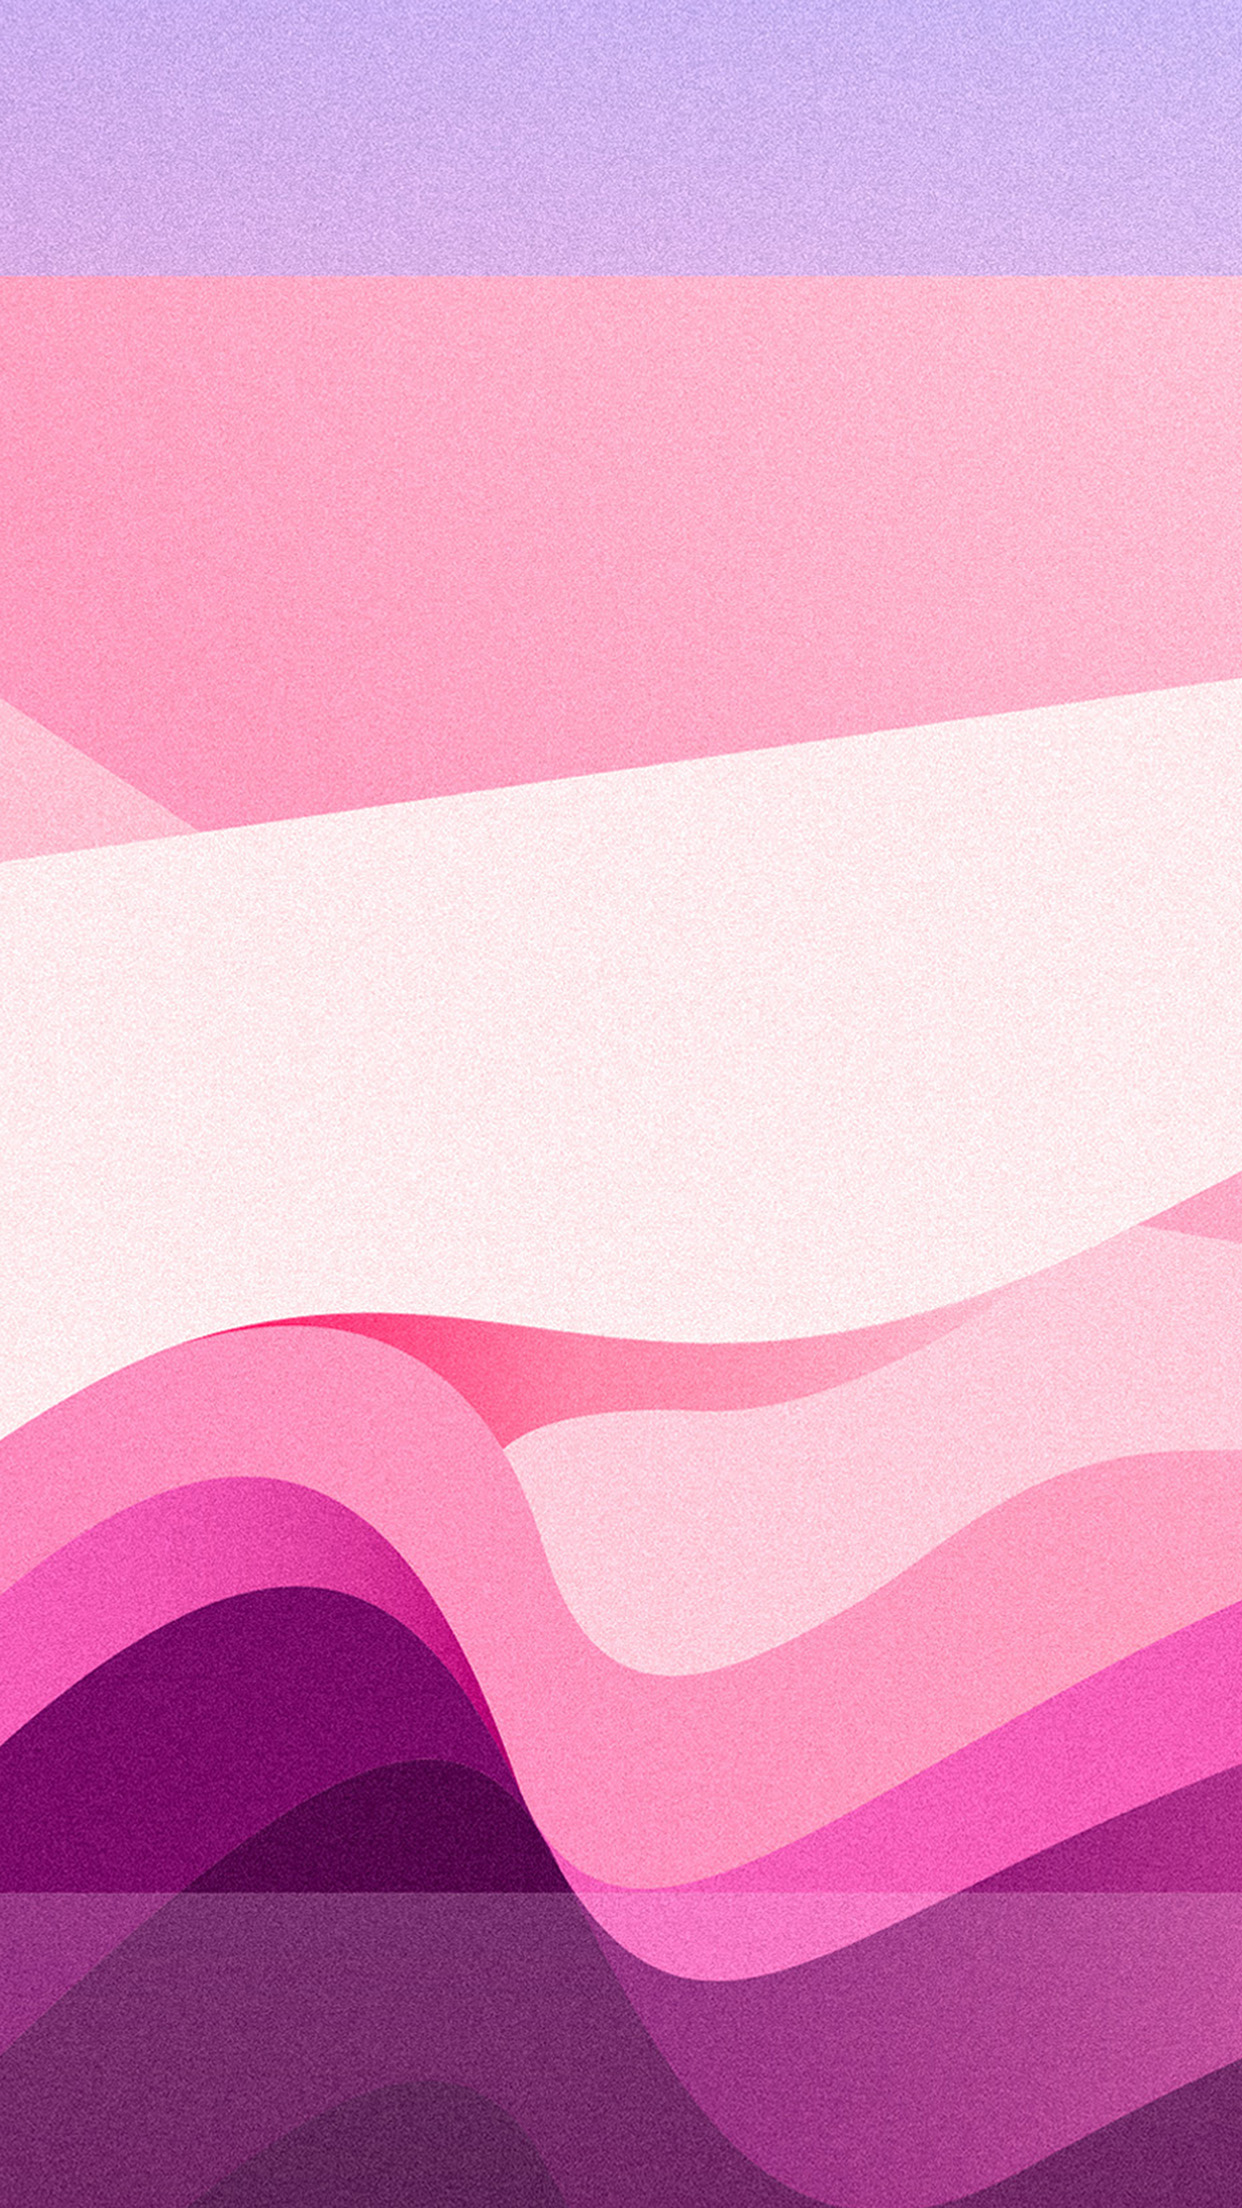 Pink Patterned Background - HD Wallpaper 